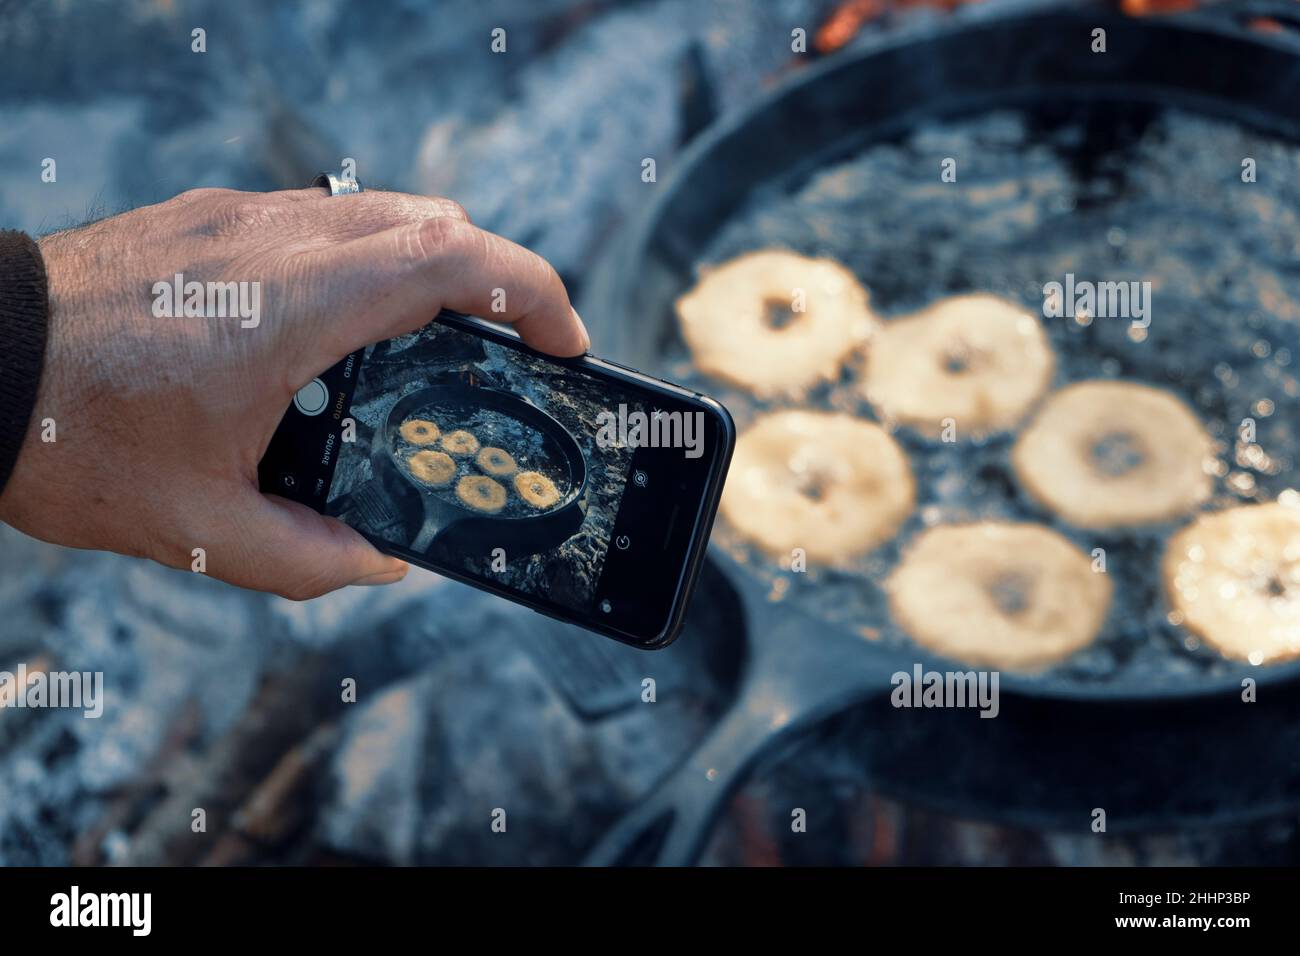 Taking a photo of Homemade donuts frying in cast iron skillet outdoors at campsite. Stock Photo